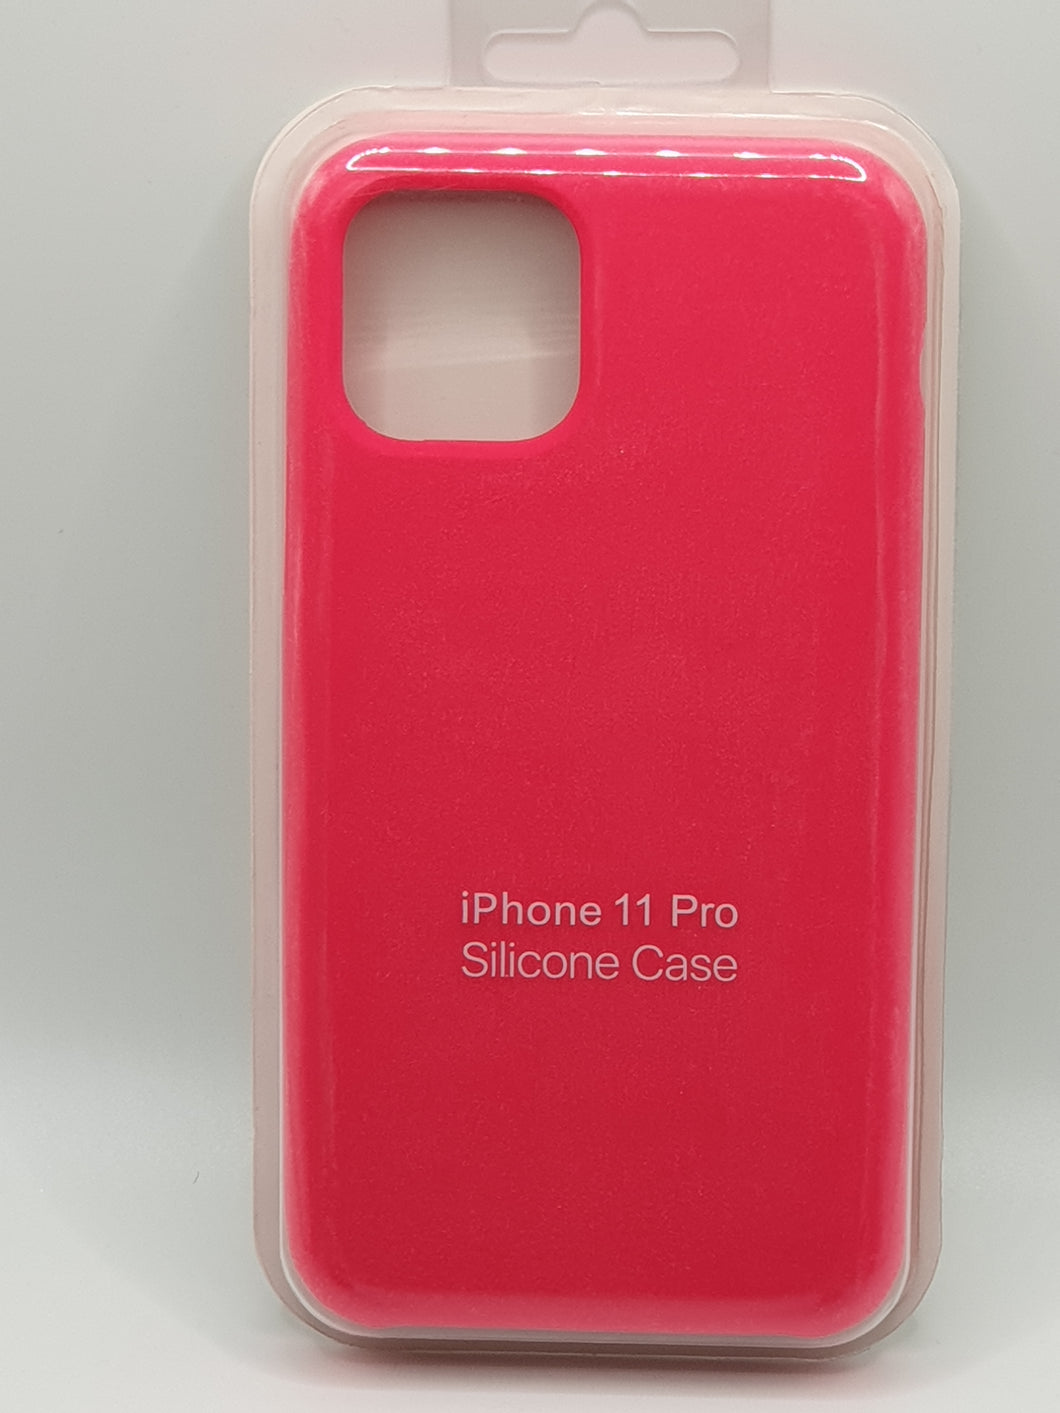 iPhone 11 Pro Silicone Hot Pink Case Cover Soft Touch Protective